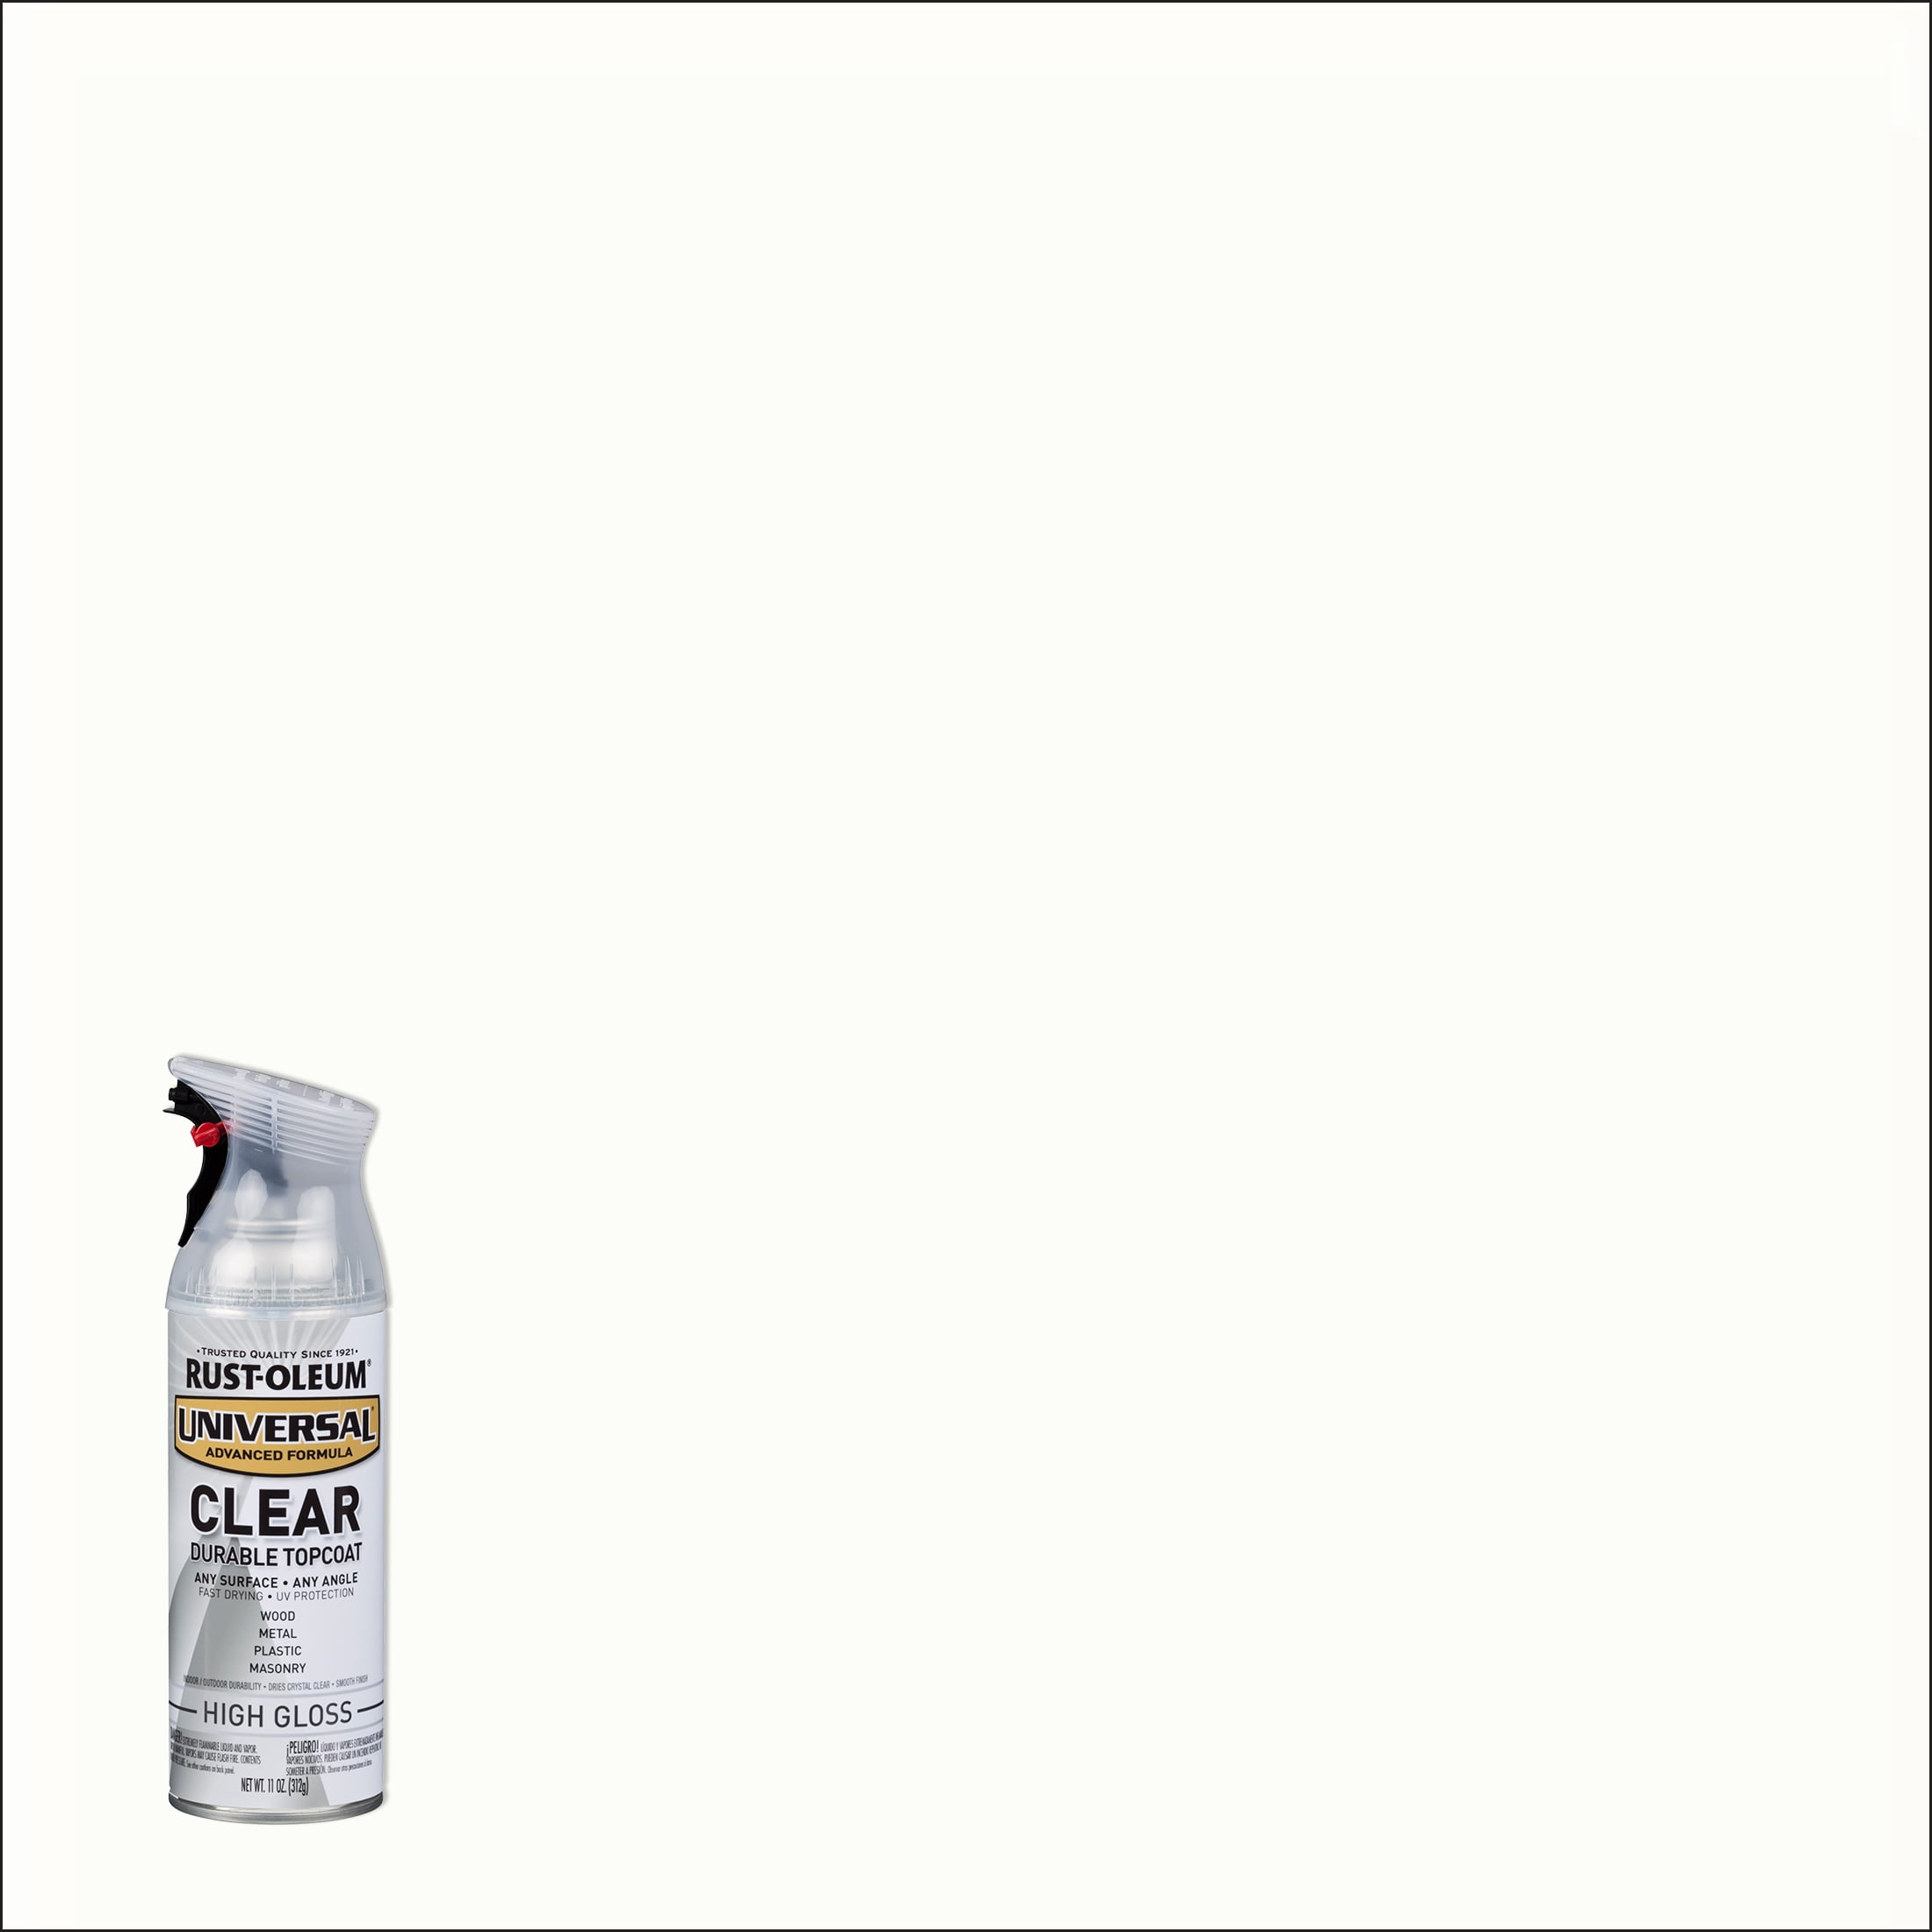 Rust-Oleum Universal 6-Pack Gloss Vintage Gold Metallic Spray Paint and Primer in One (NET Wt. 11-oz ) | 342918SOS